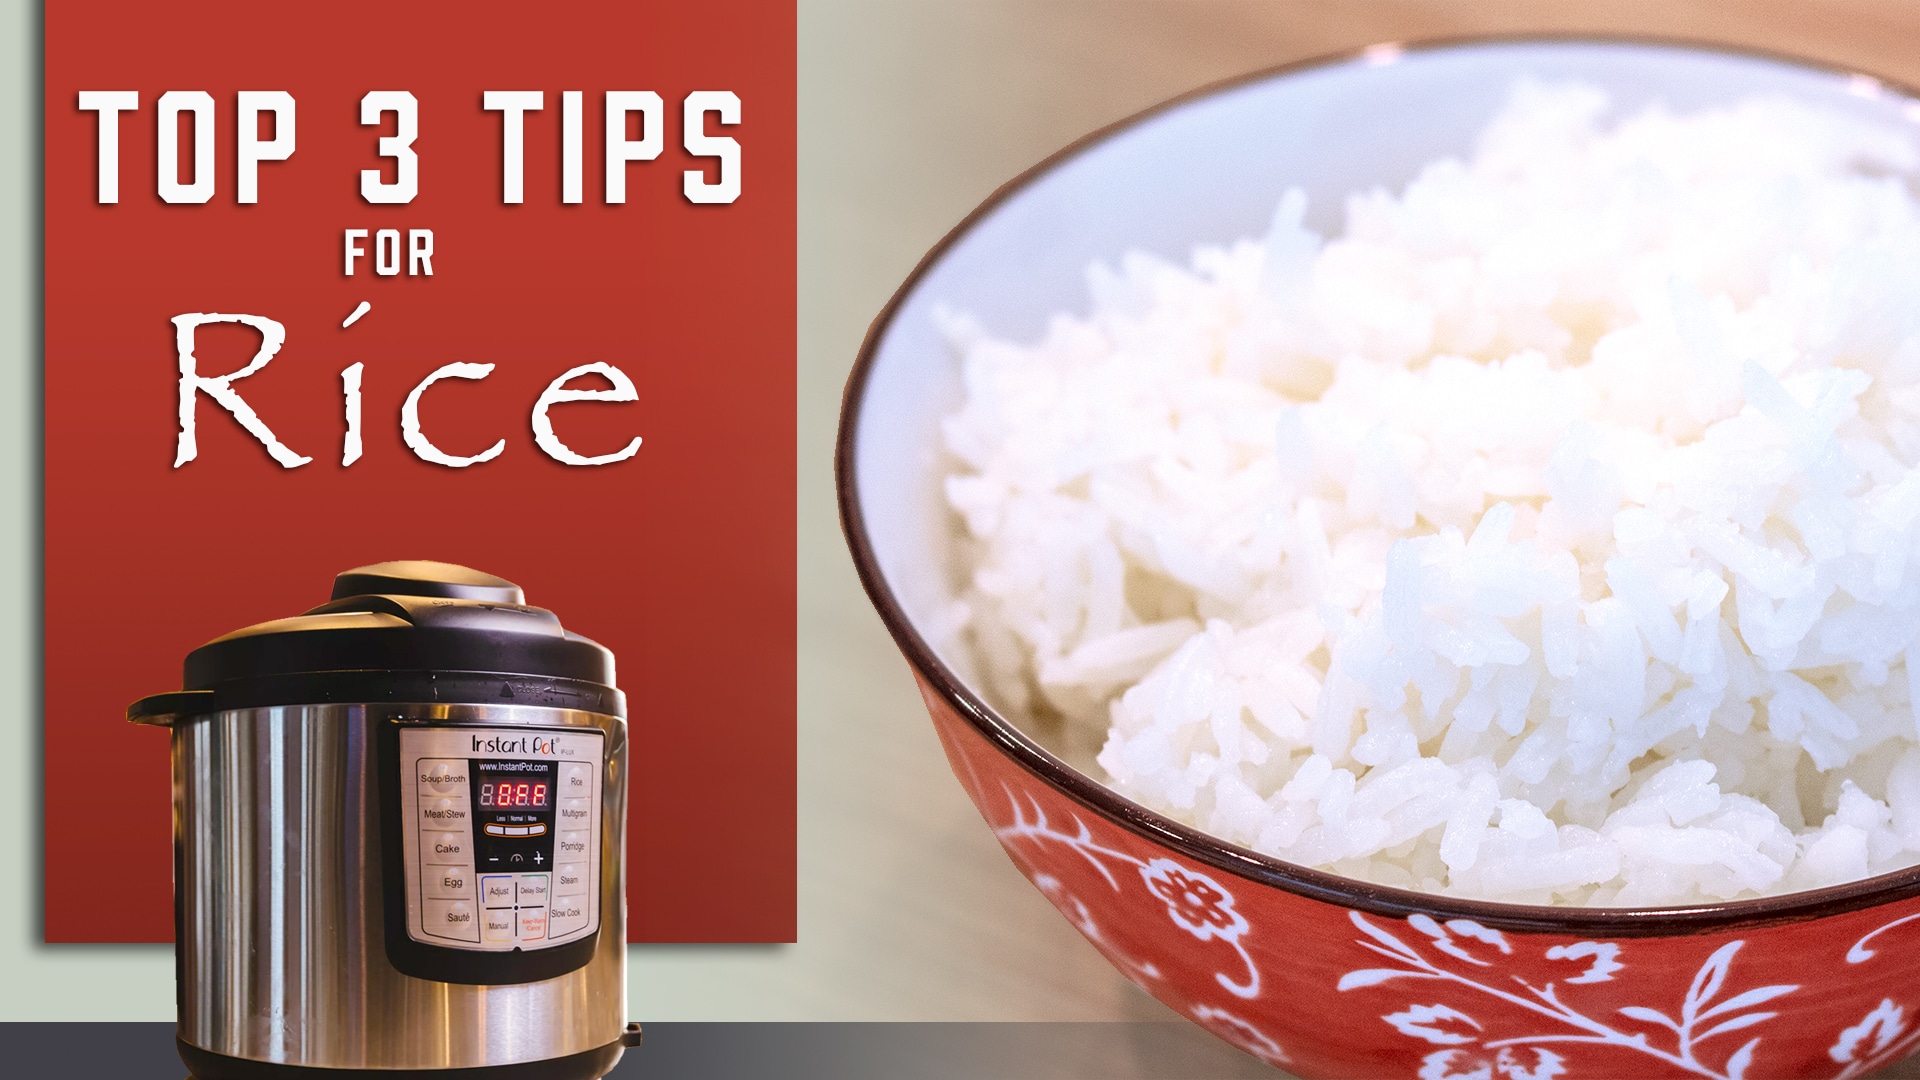 https://dadgotthis.com/wp-content/uploads/2019/09/Making-Rice-In-The-Instant-Pot-Thumbnail.jpg